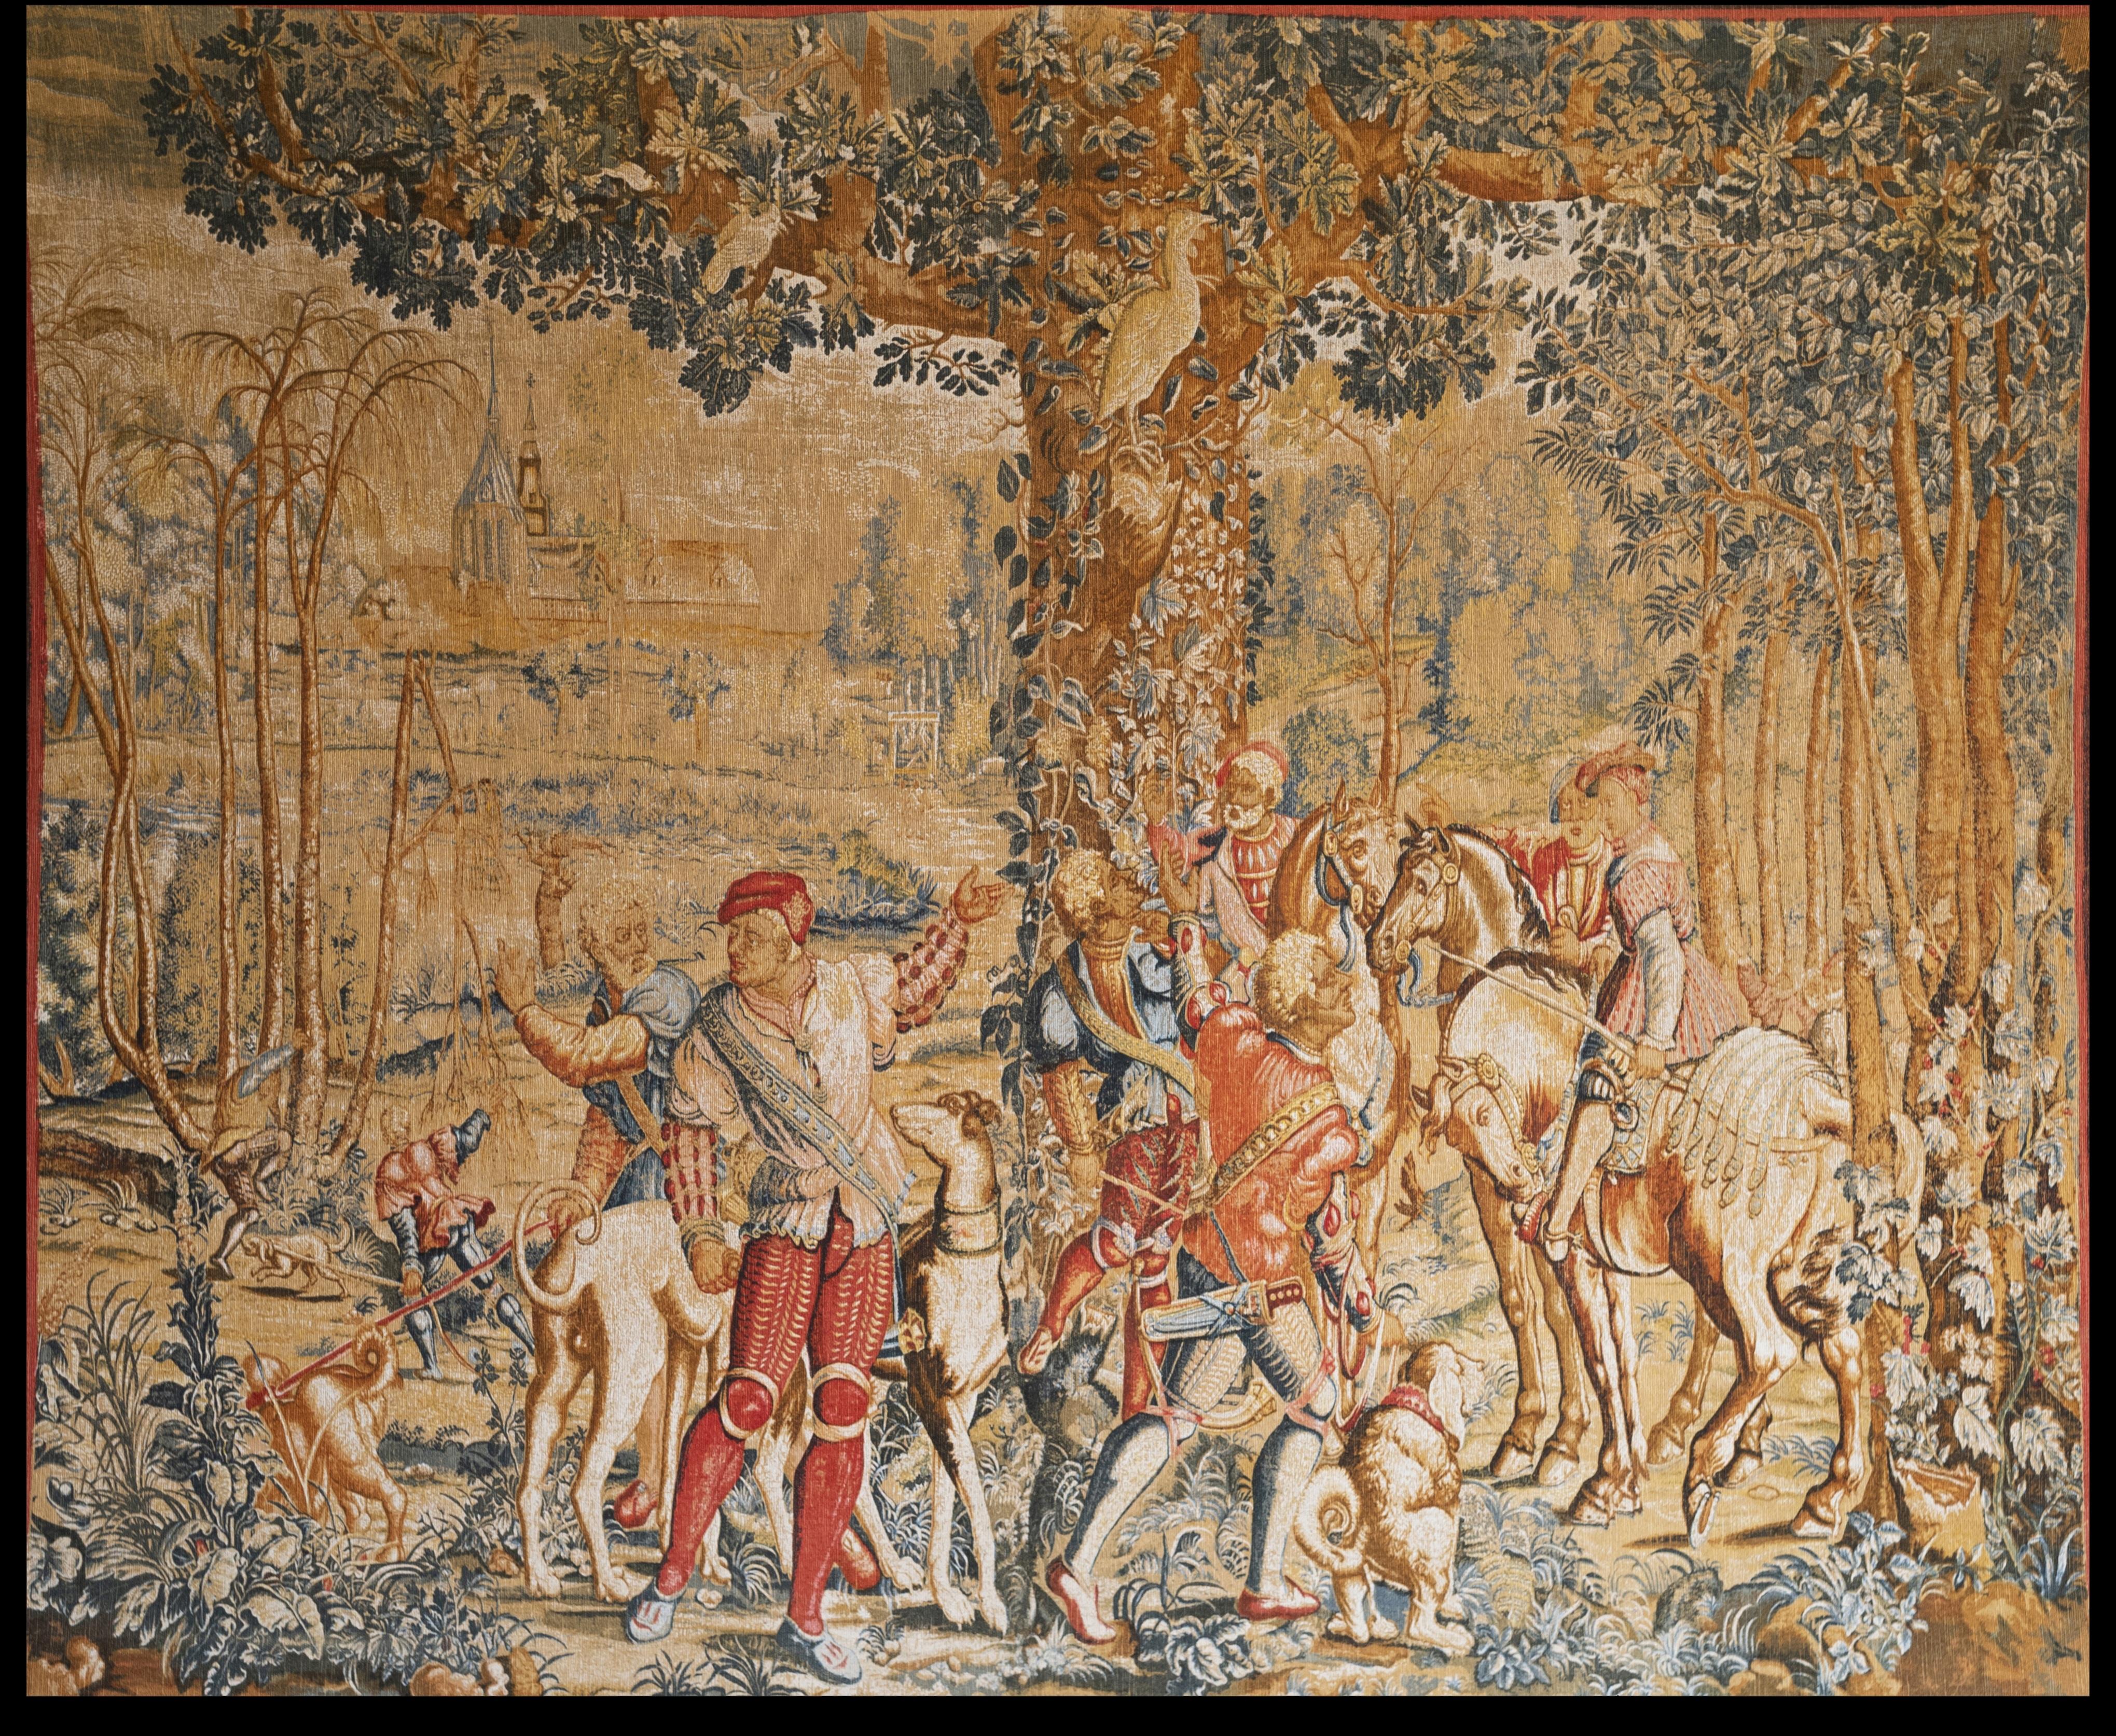 This early 20th Century French-Rococo, inspired by Charles Le Brun’s designed tapestries, depicting a hunting scene - one the favorite entertainments in the court of Louis XIV. This piece represents the famous series “Maximilien Hunt,” and is